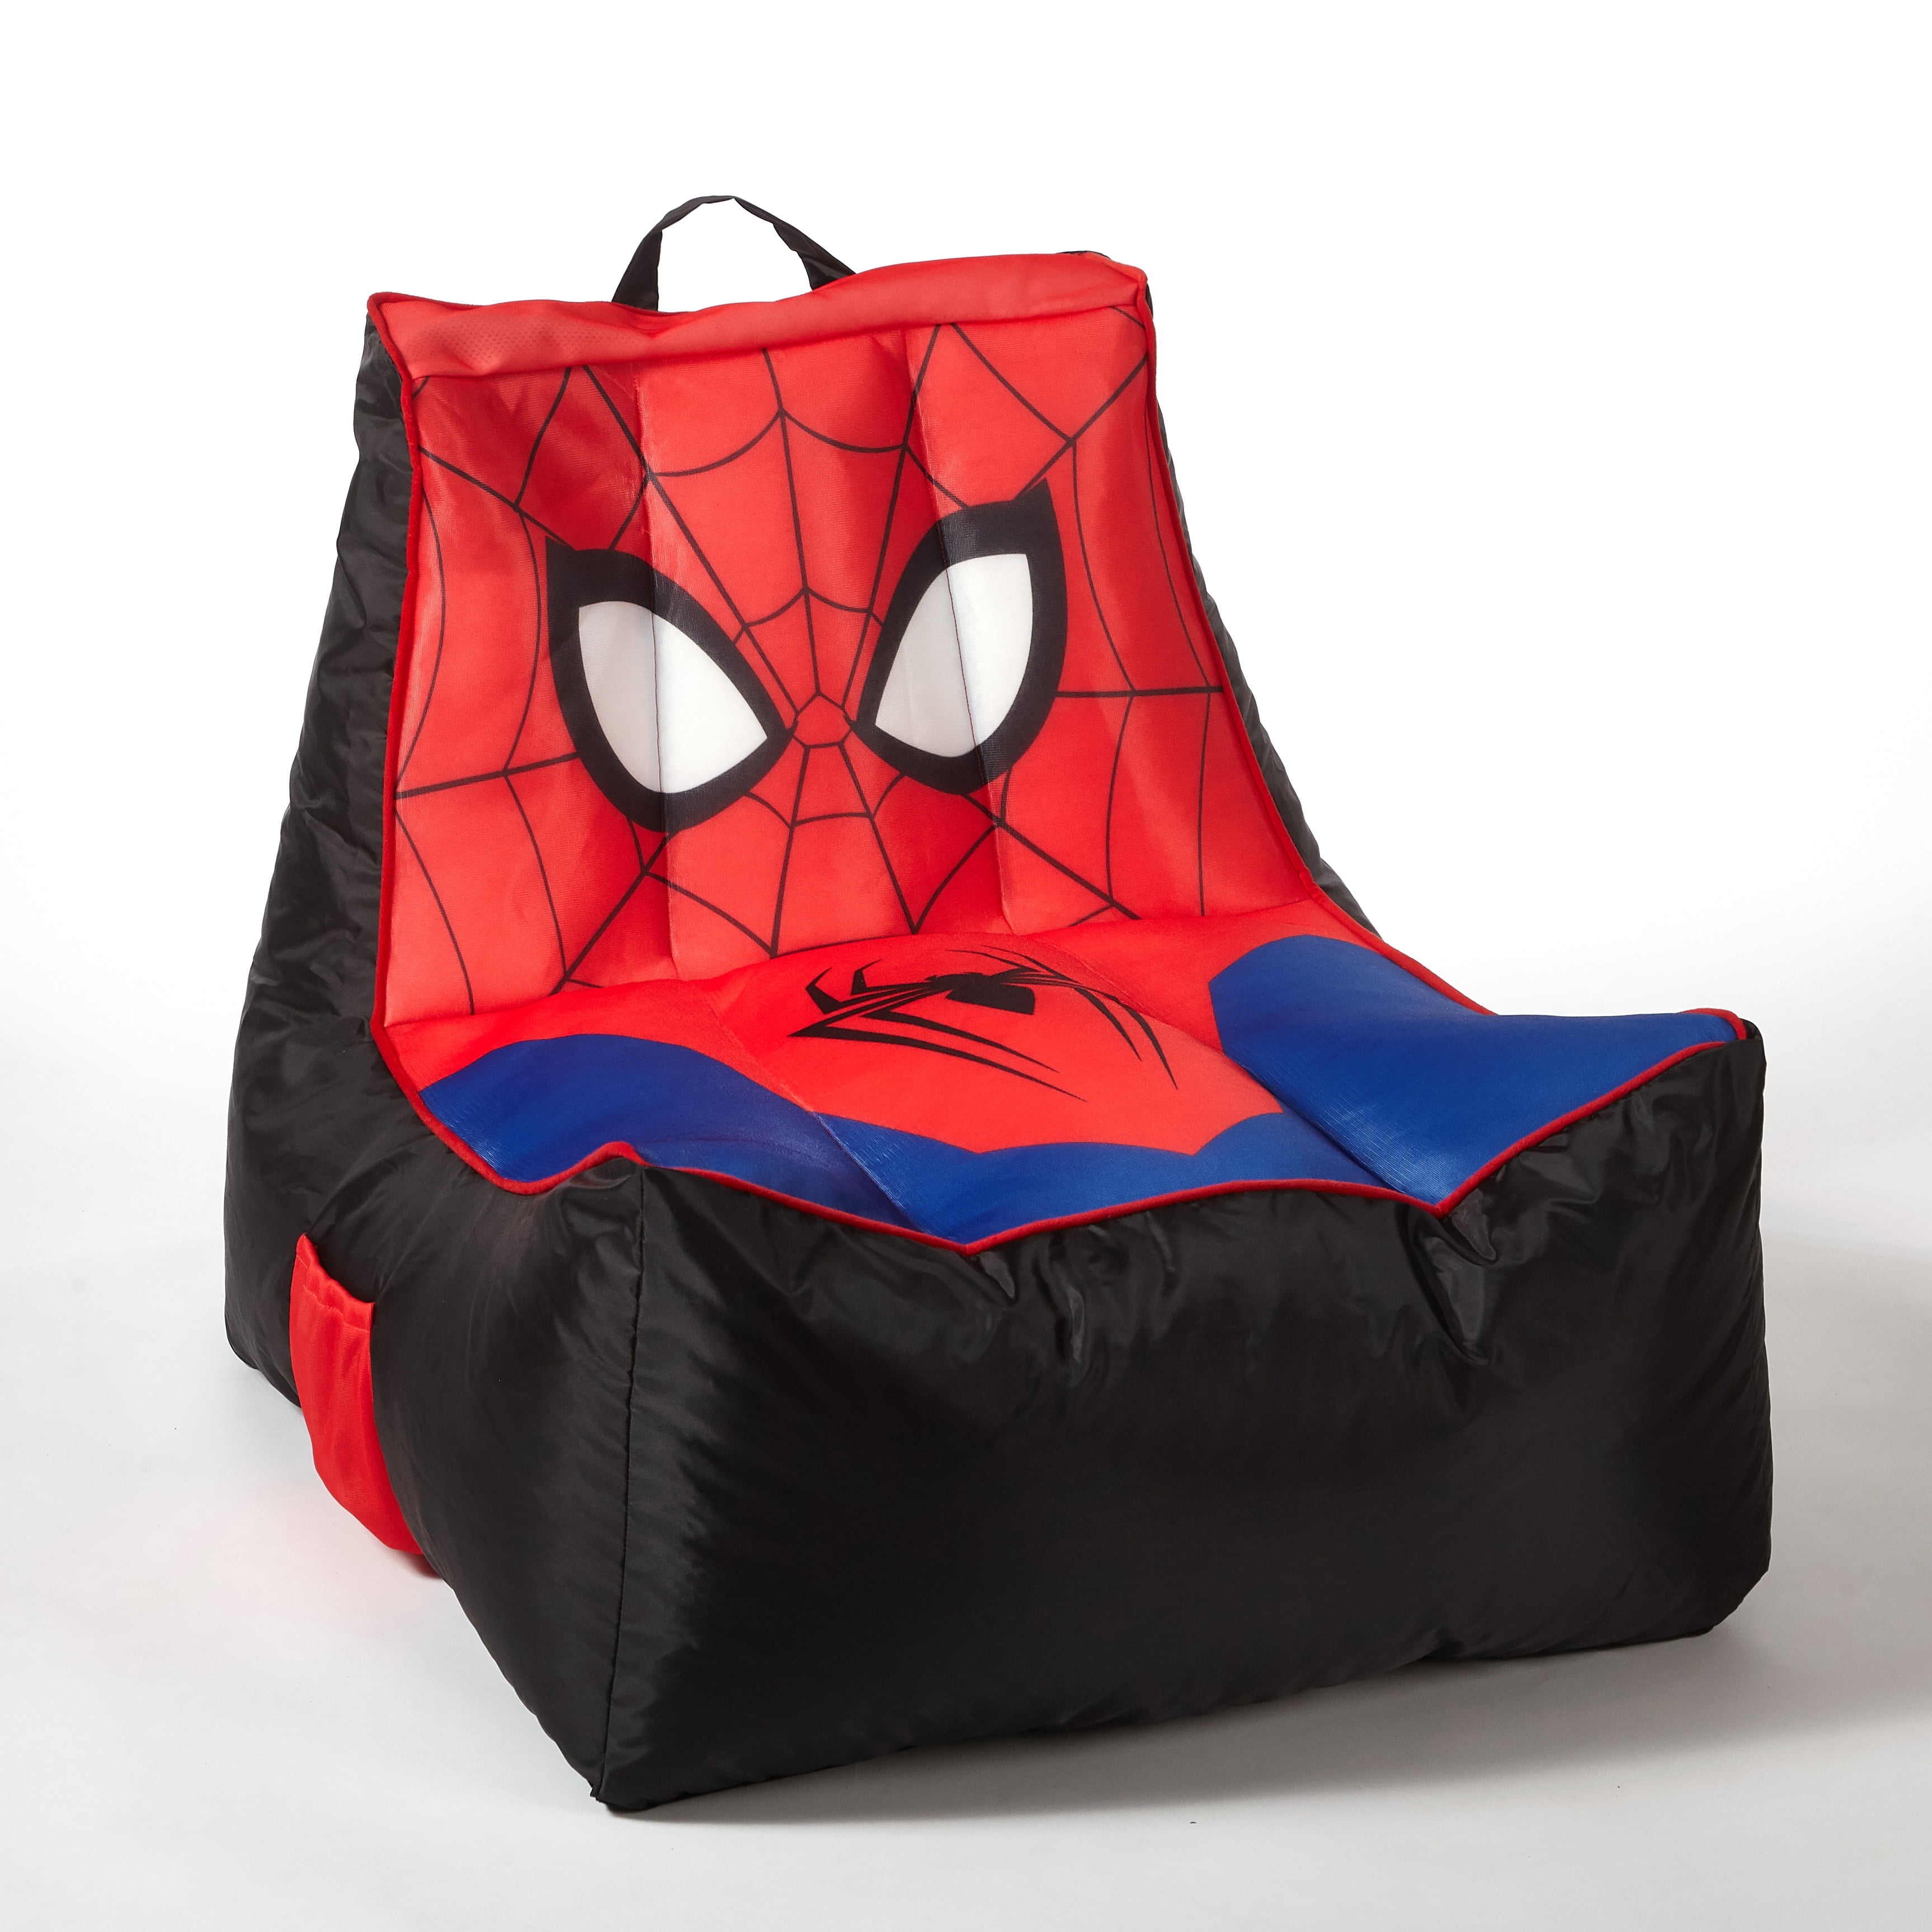 Marvel Spiderman Gaming Bean Bag Chair with Pocket